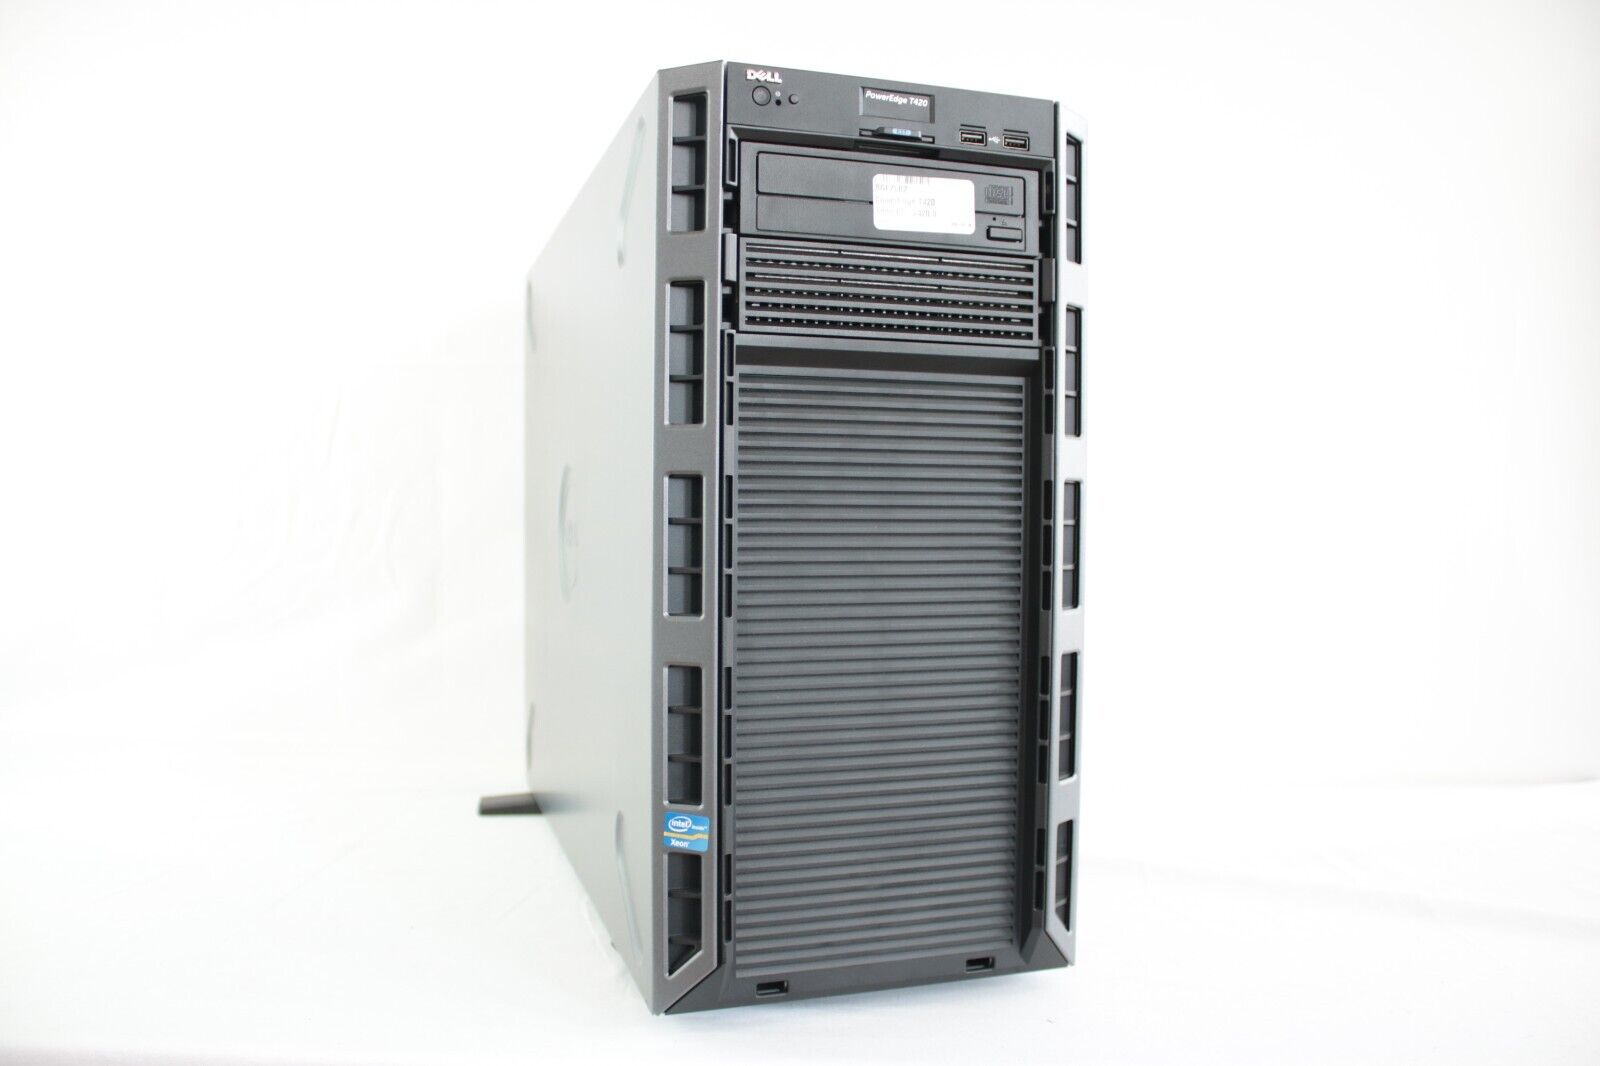 Dell PowerEdge T420 Tower w/ Xeon E5-2420 CPU @ 1.9GHz, 8GB RAM, No HDD or OS